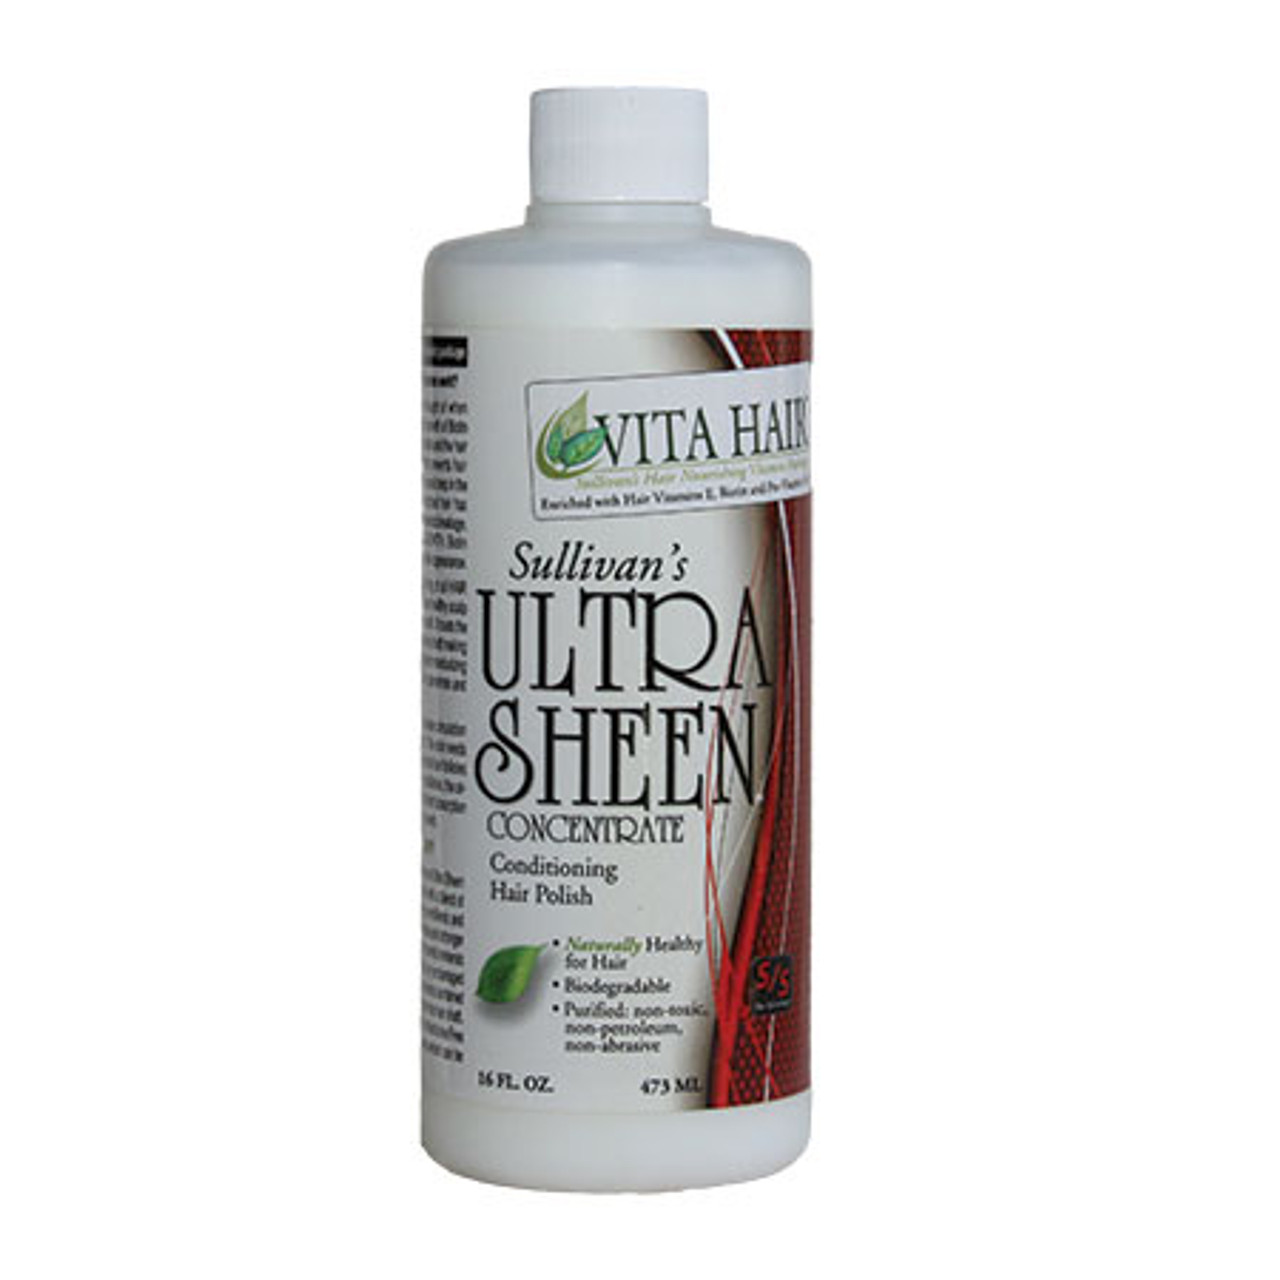 Sullivan's Ultra Sheen Concentrate Conditioning - Pilot Point Feed